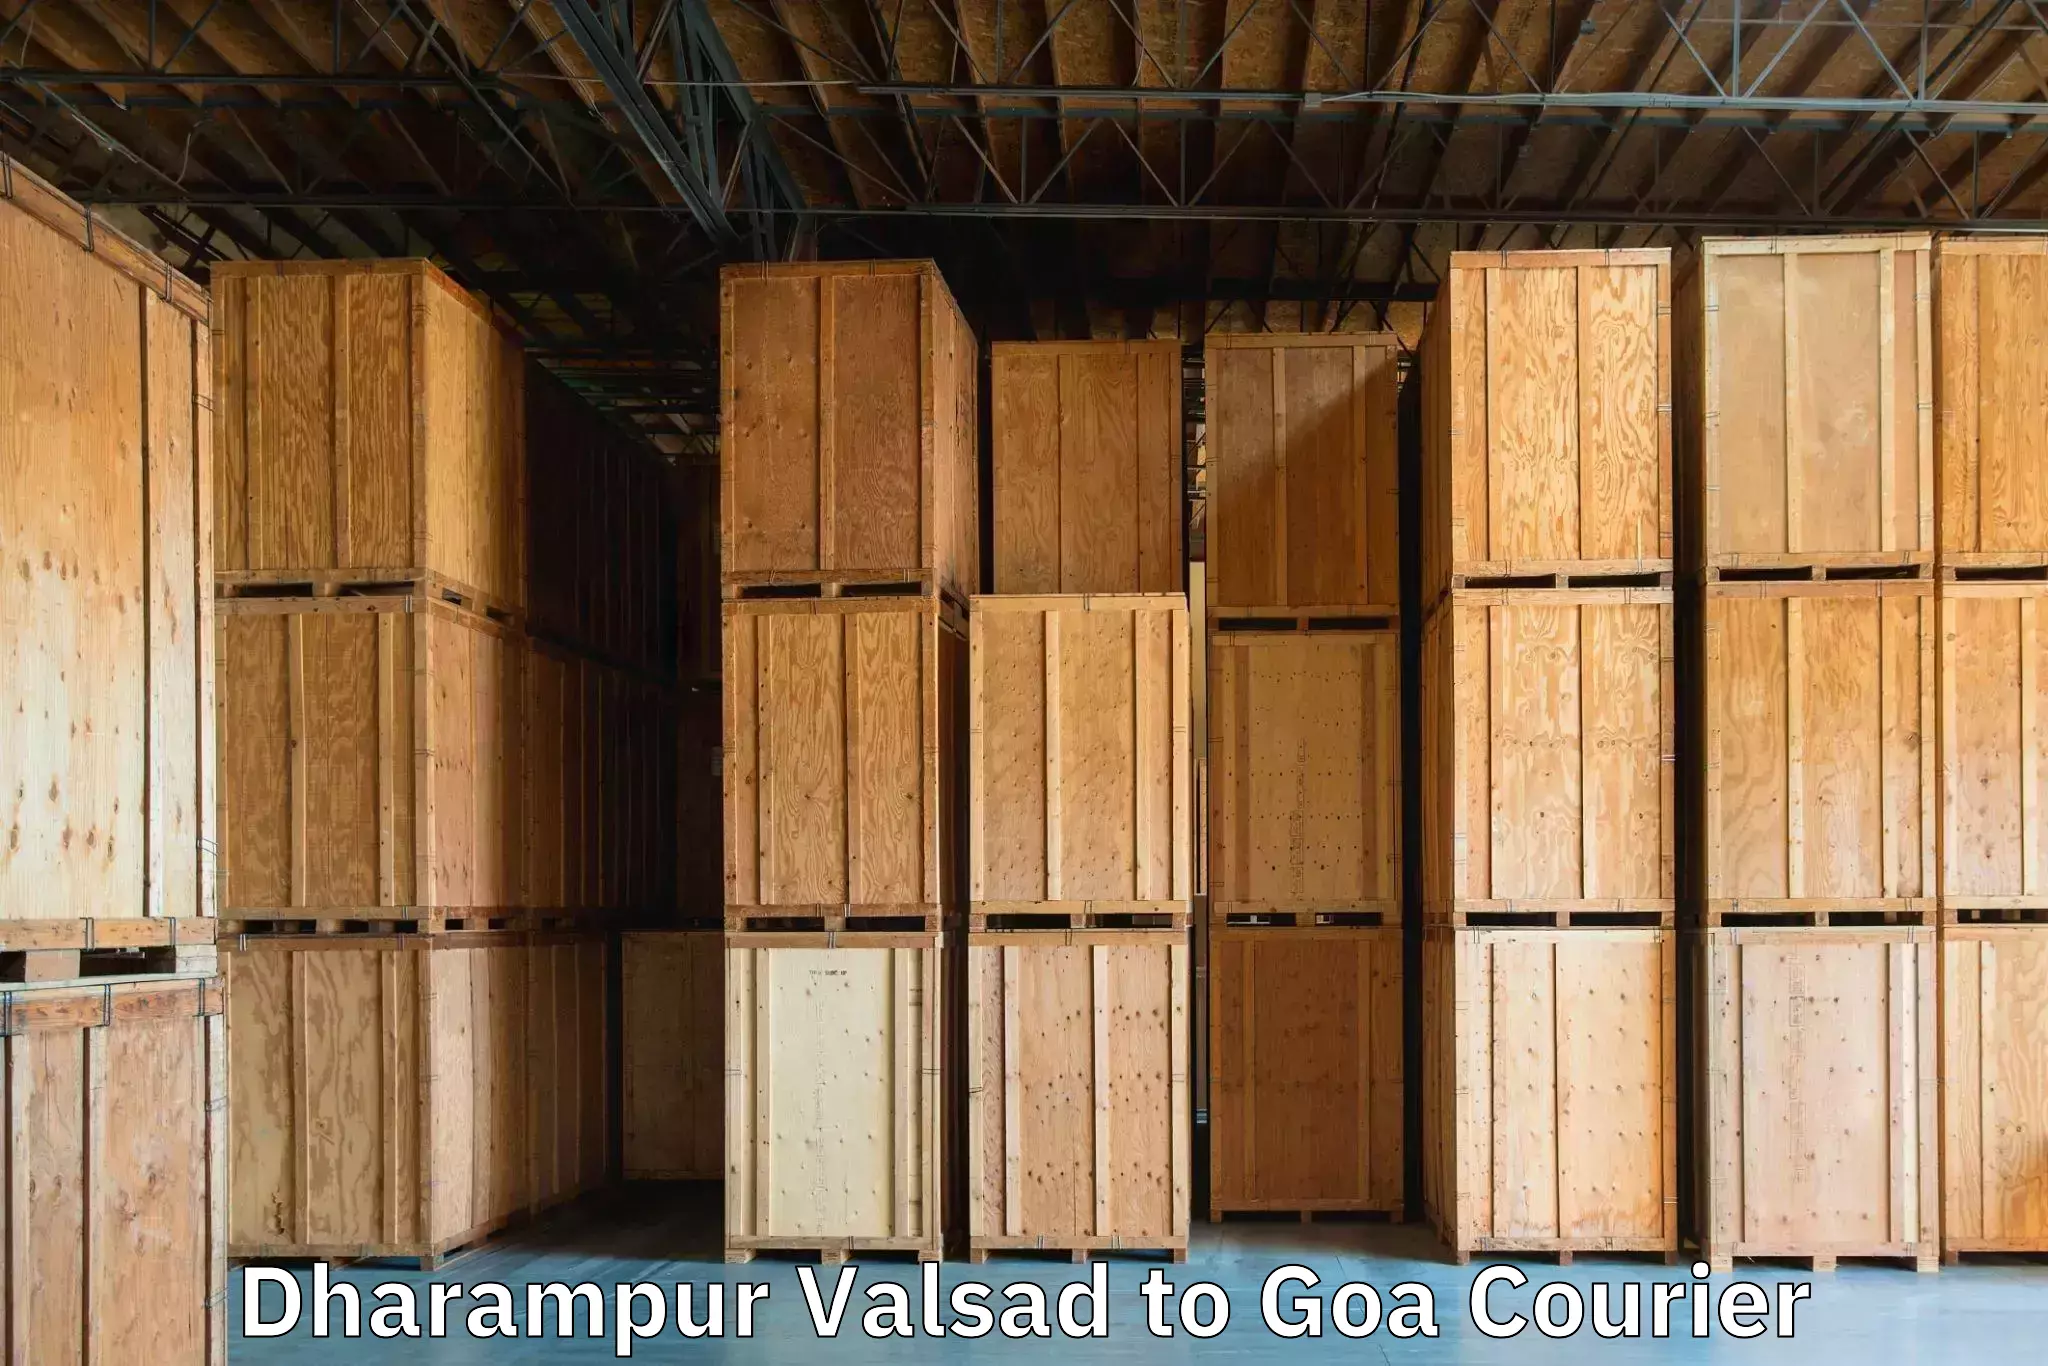 Hassle-free luggage shipping in Dharampur Valsad to Vasco da Gama